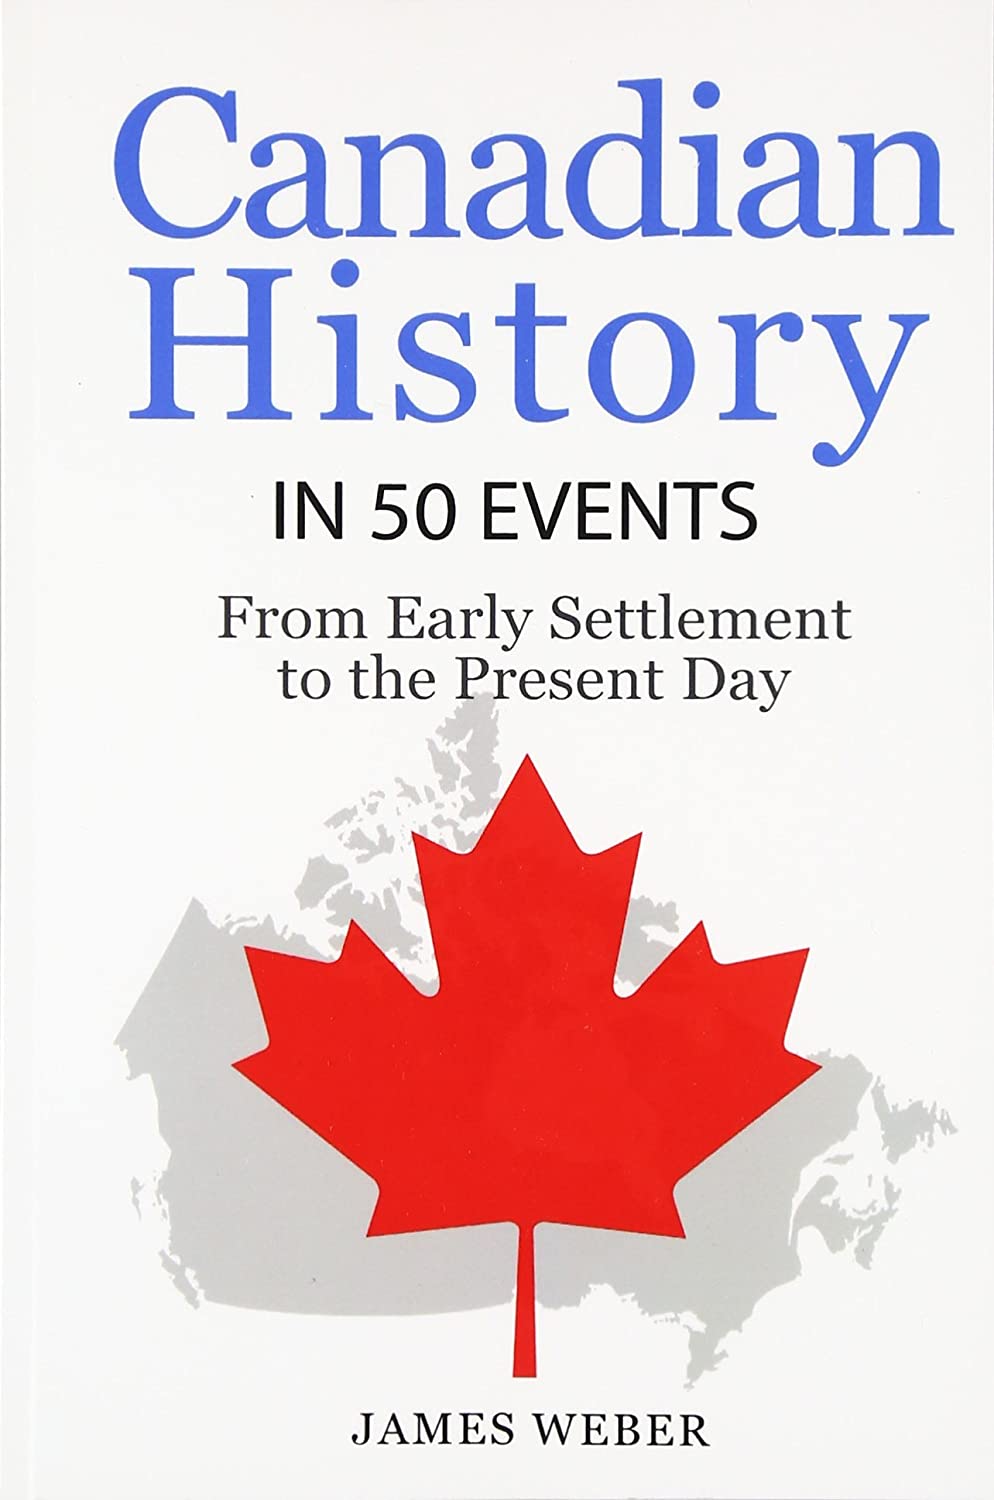 History: Canadian History in 50 Events: From Early Settlement to the Present Day (Canadian History For Dummies, Canada History, History Books) (History in 50 Events Series) (Volume 12)